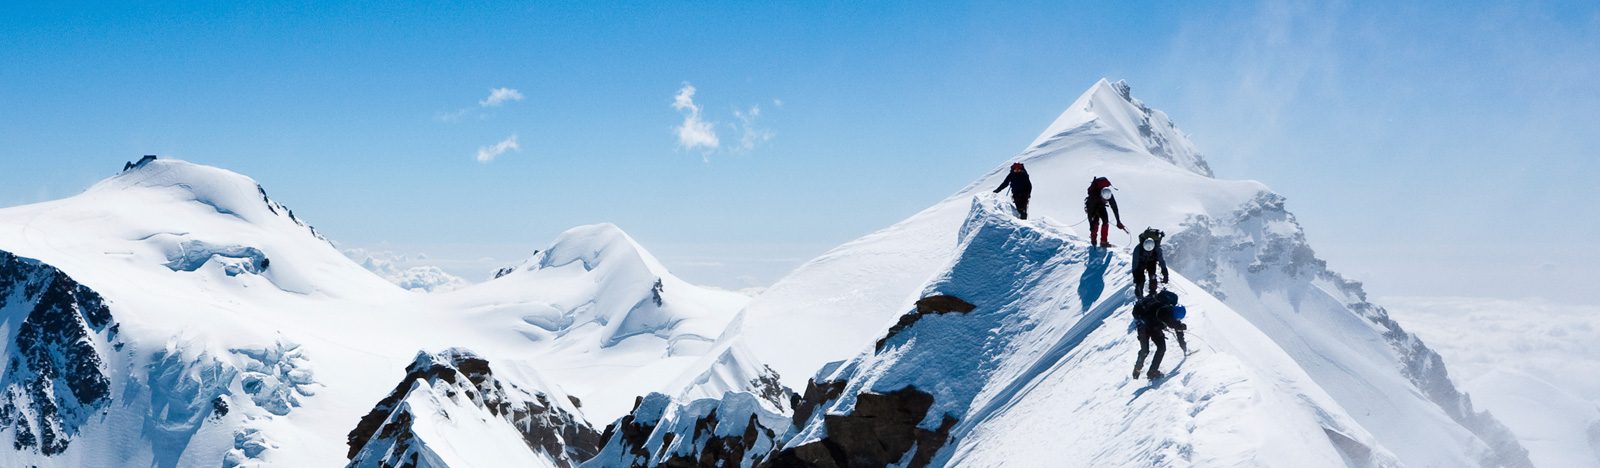 People hiking on top of snowy mountain